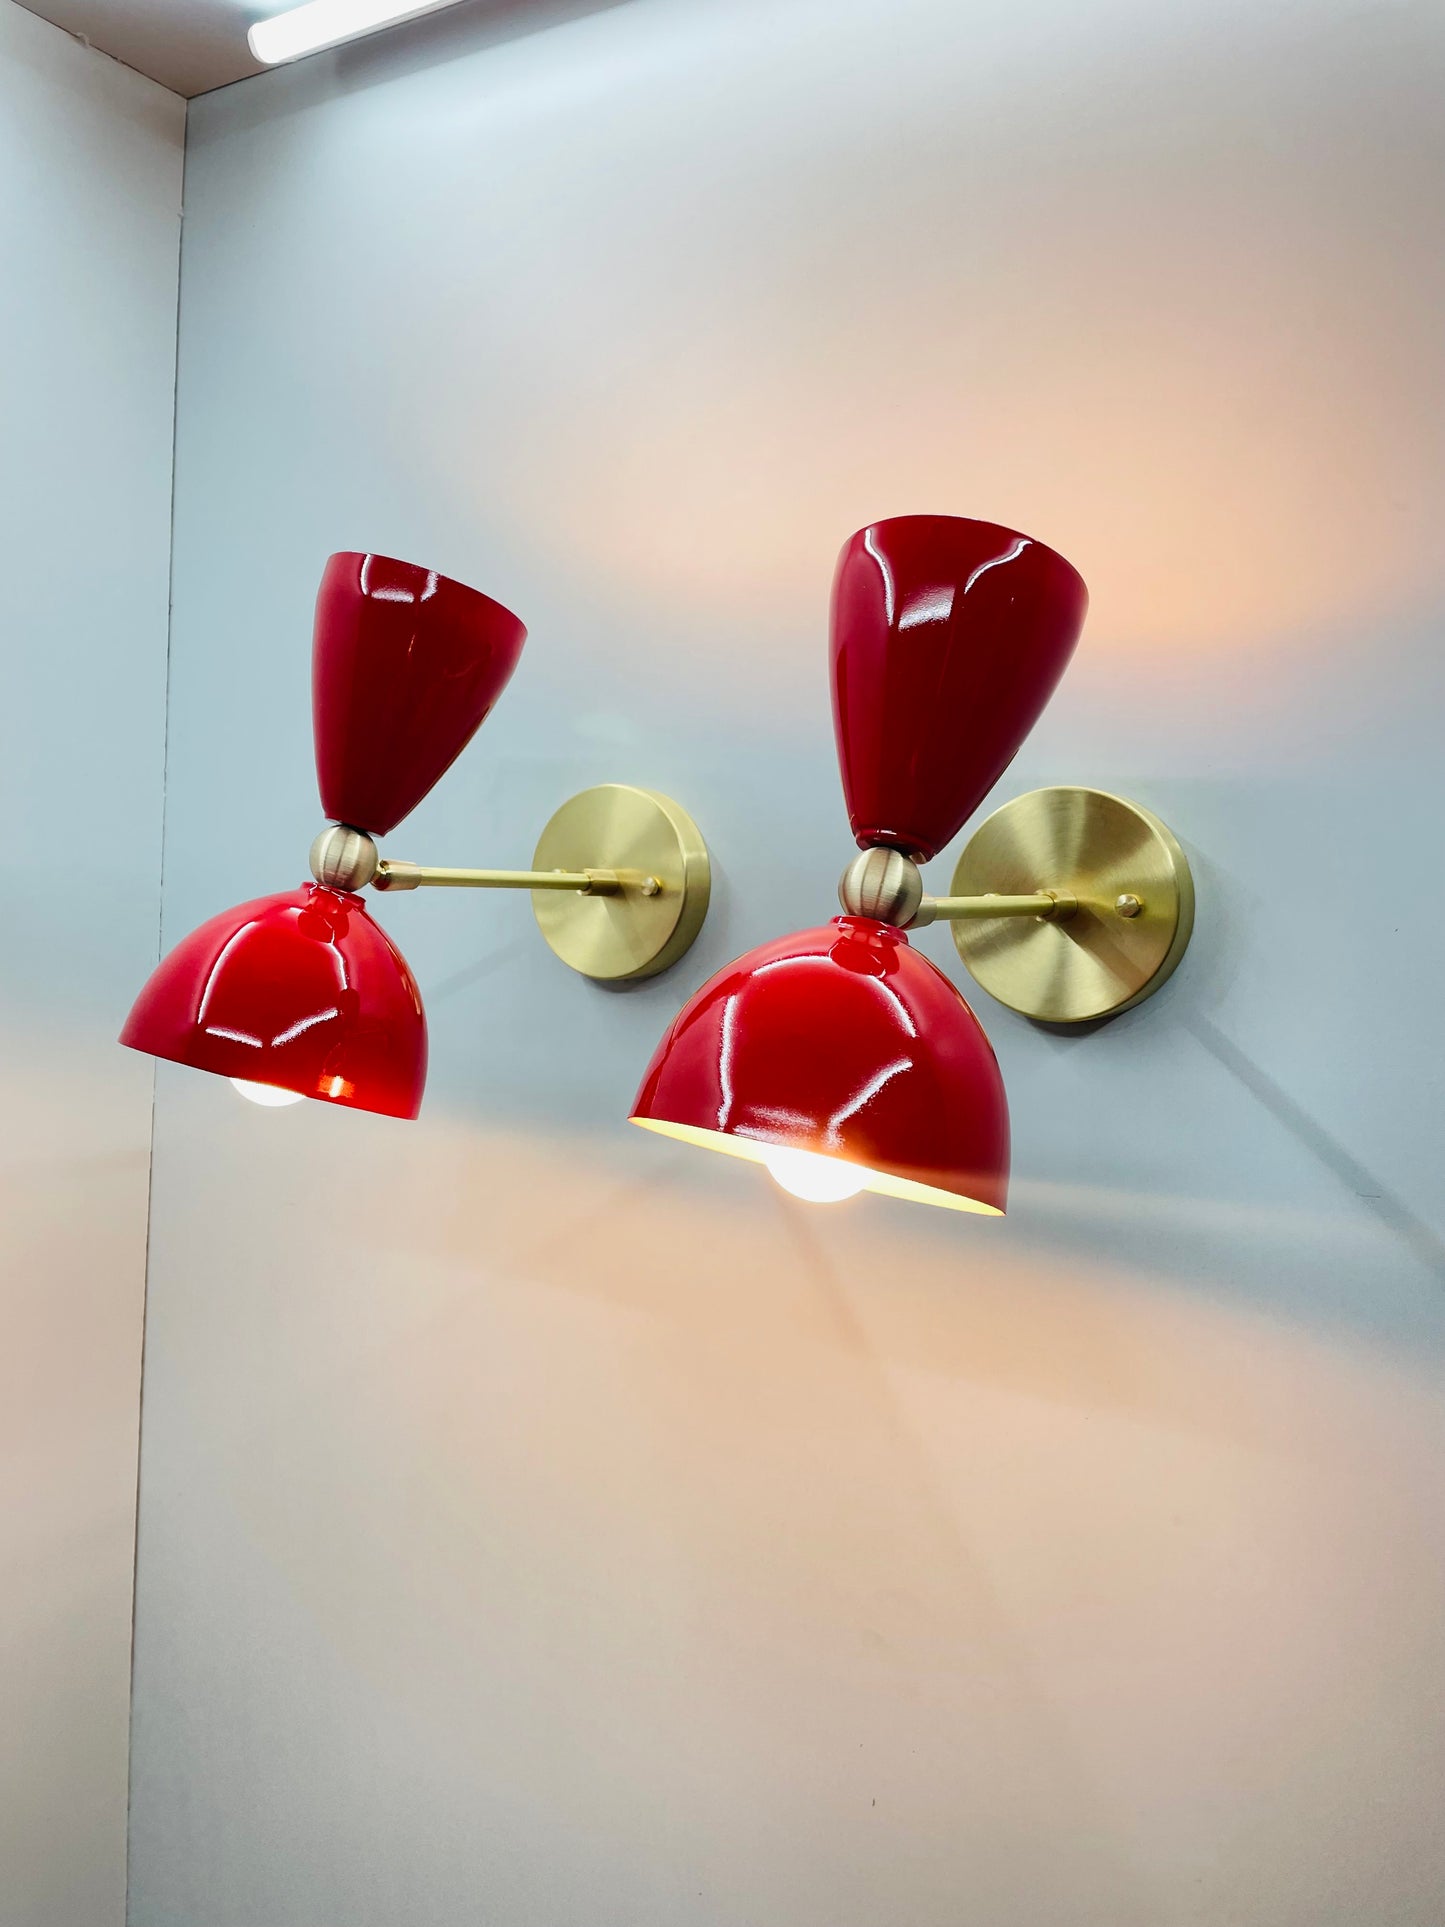 Pair of Brass Wall Sconce Lights - Vibrant Red Color